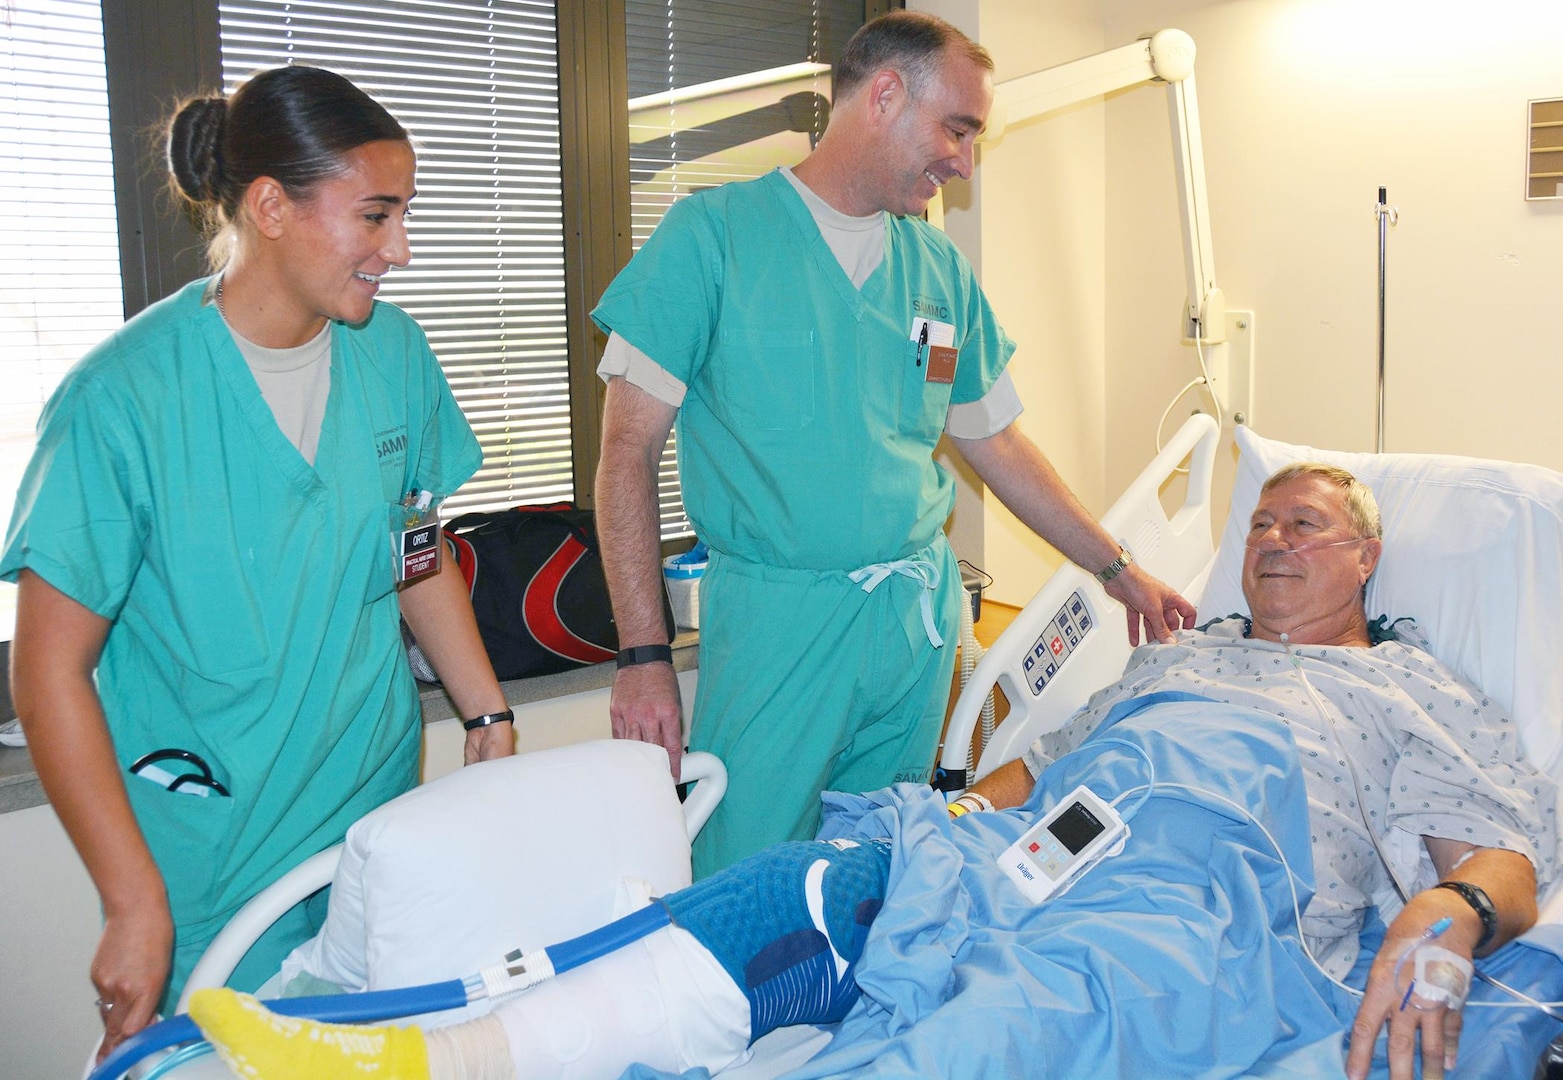 Army Col. Richard Evans (center), deputy commander for nursing, checks on retired Col. Randy Maschek (right) as Pvt. Karinna Ortiz, a practical nurse course student, looks on in the 2 West inpatient ward at the San Antonio Military Medical Center at Fort Sam Houston Aug. 20.